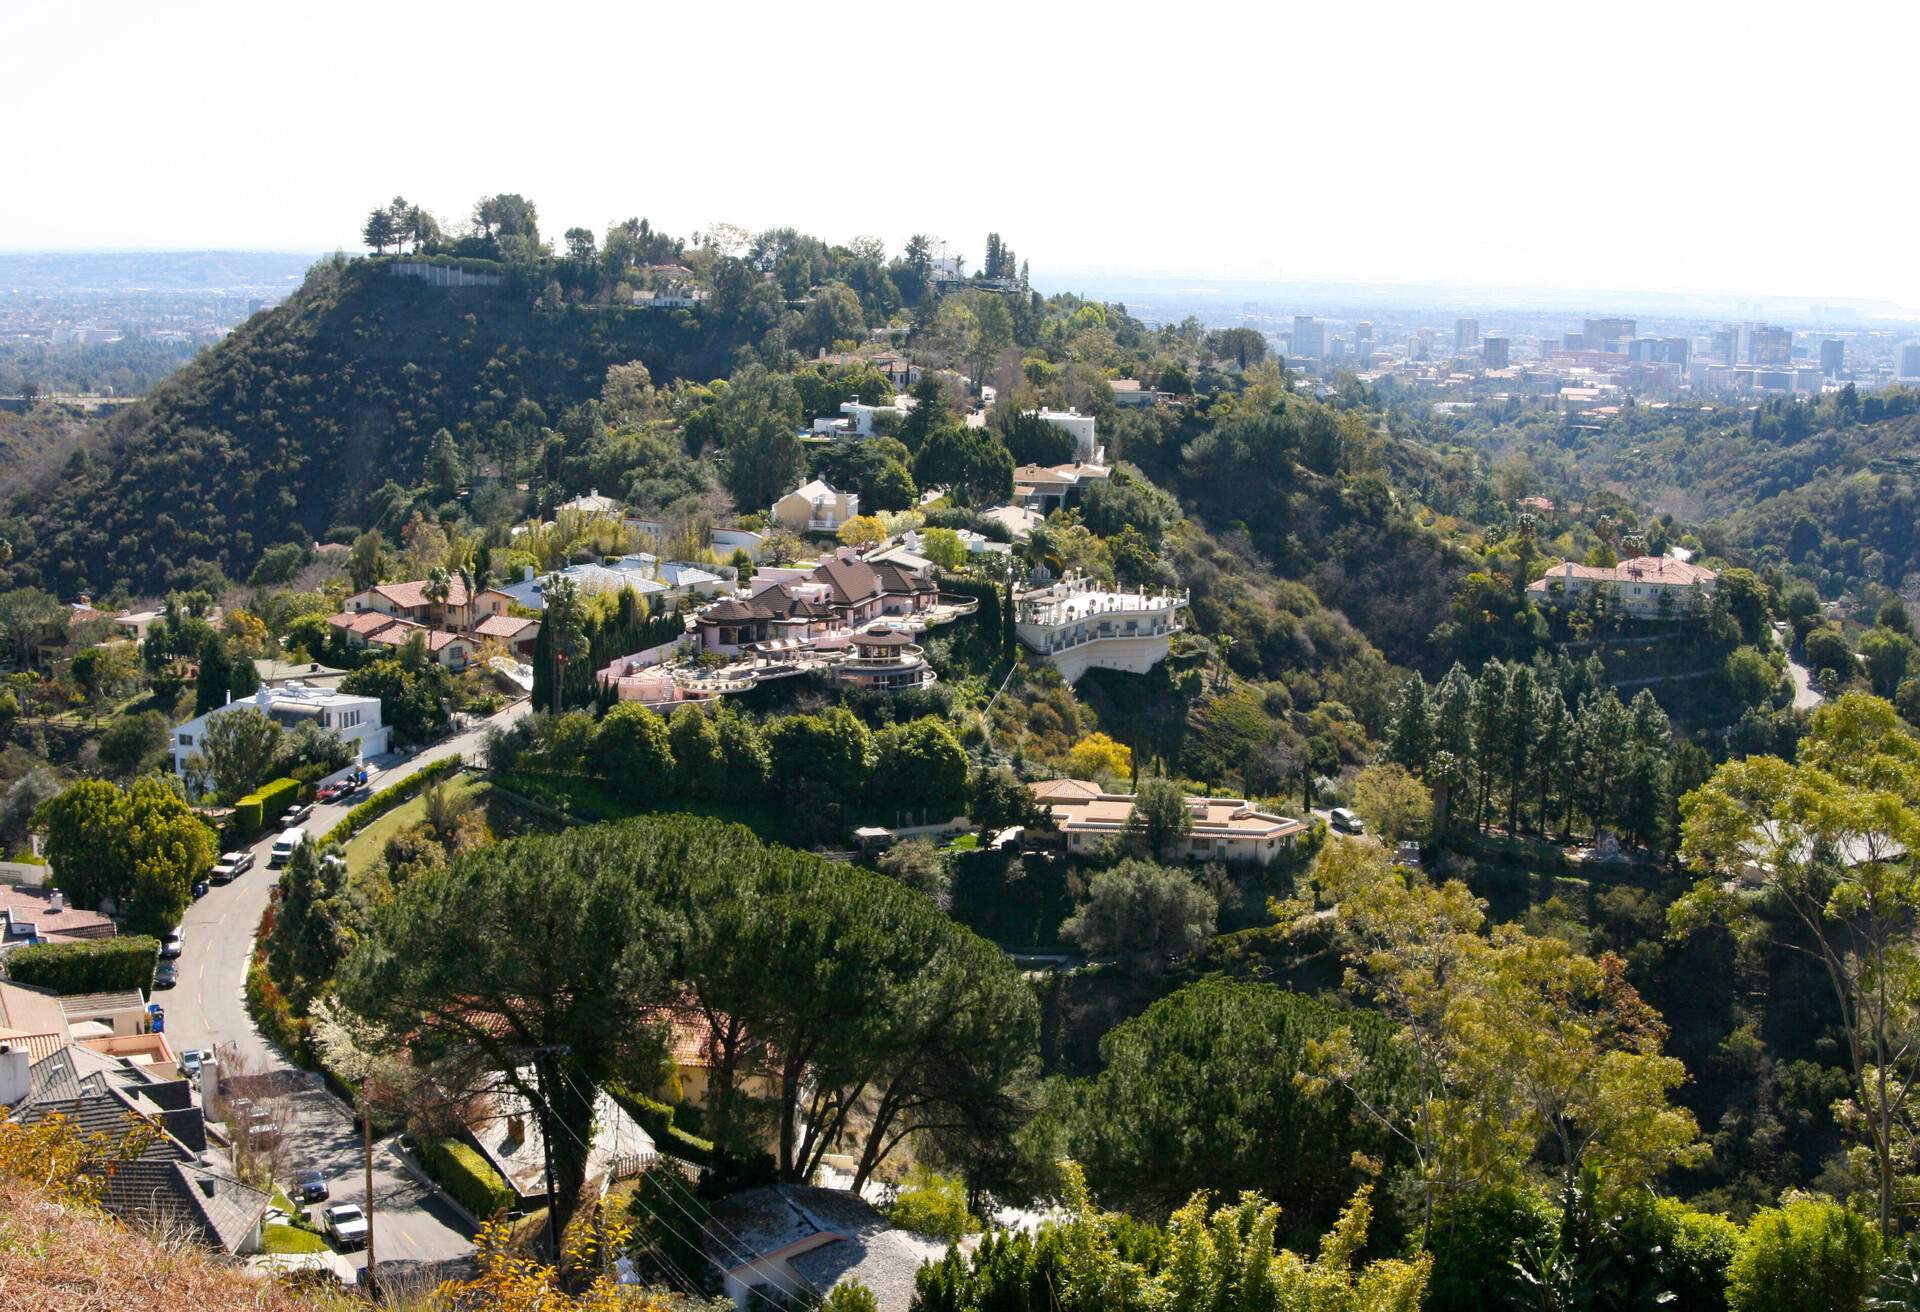 Beverly Hills where the so-called Hillbillies lived has many mansions high priced houses